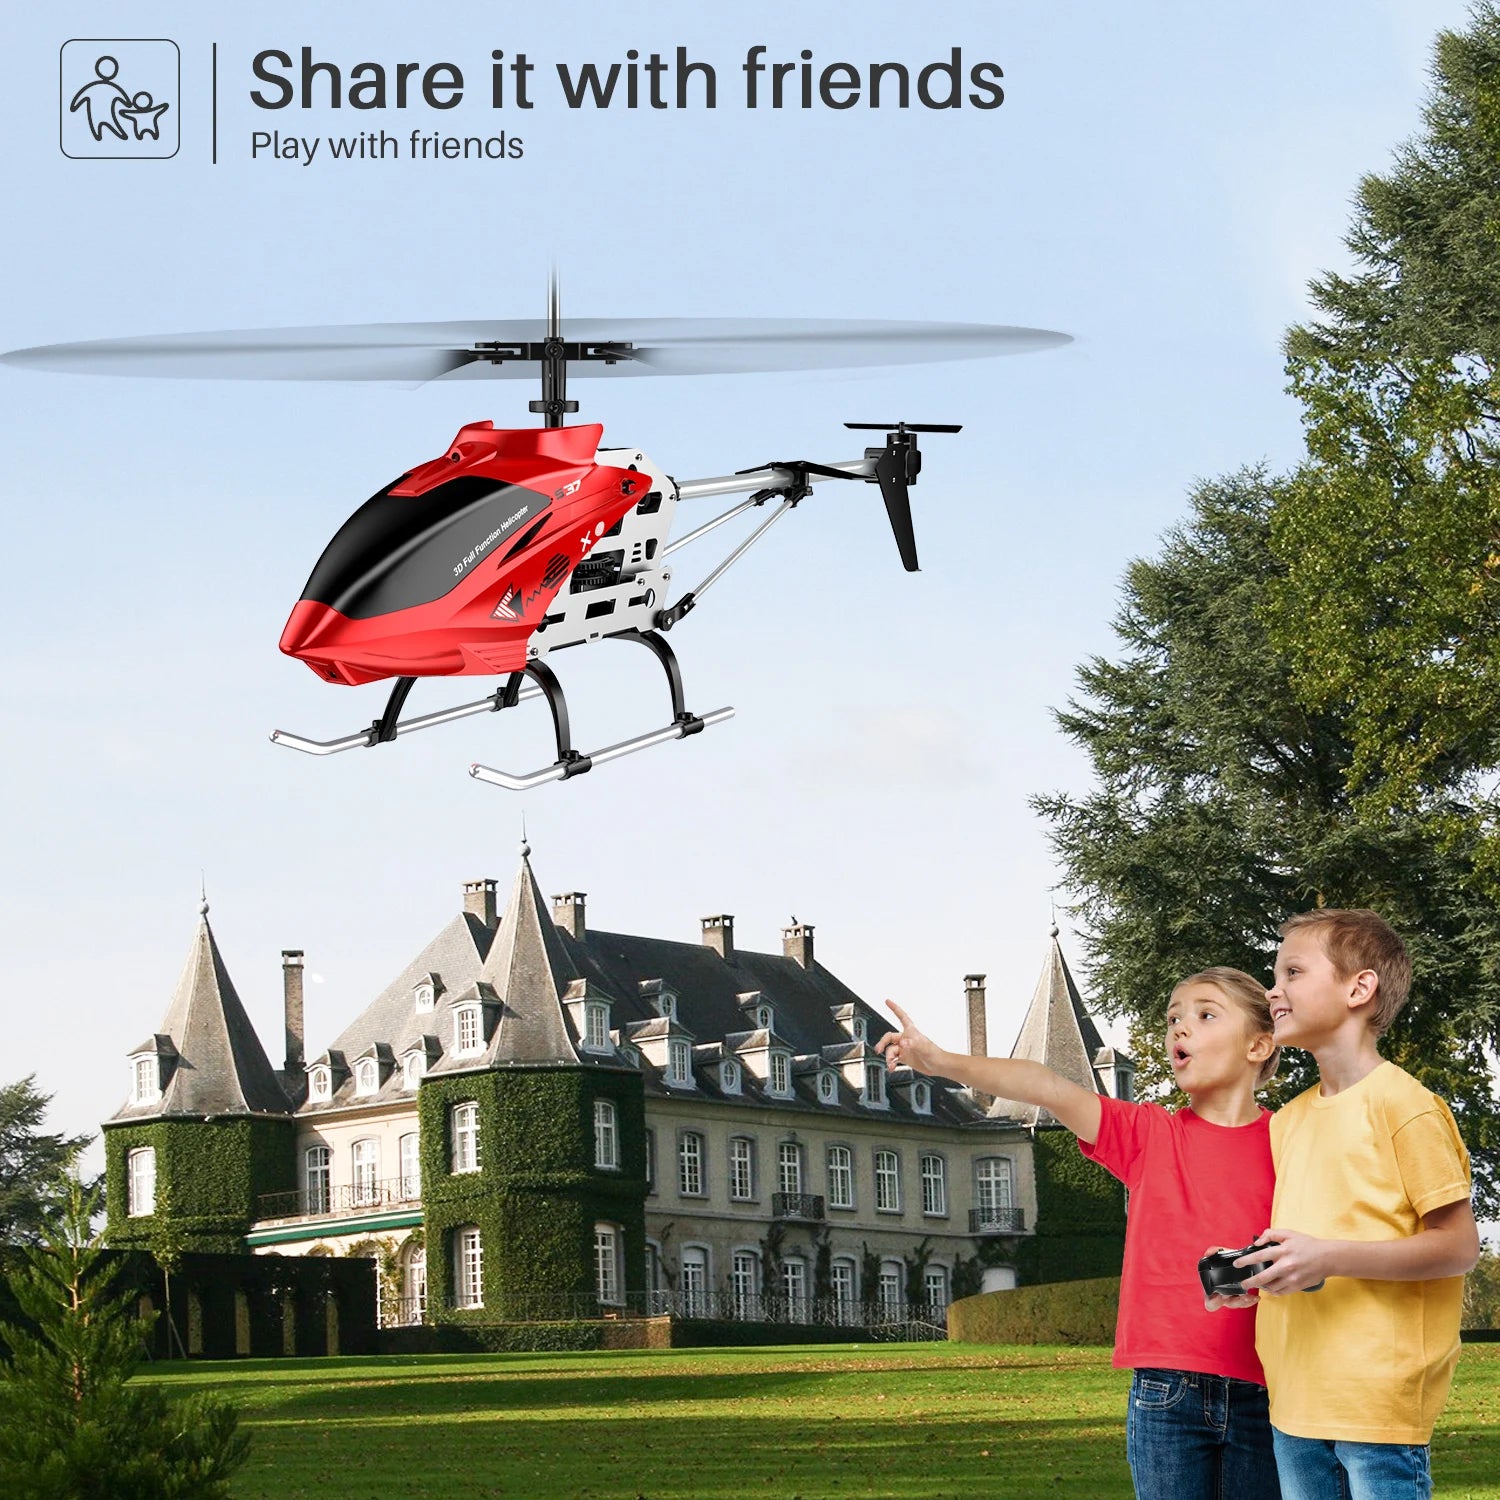 SYMA RC Helicopter, Share it with friends with friends Play" J0 Ful Functin Helc